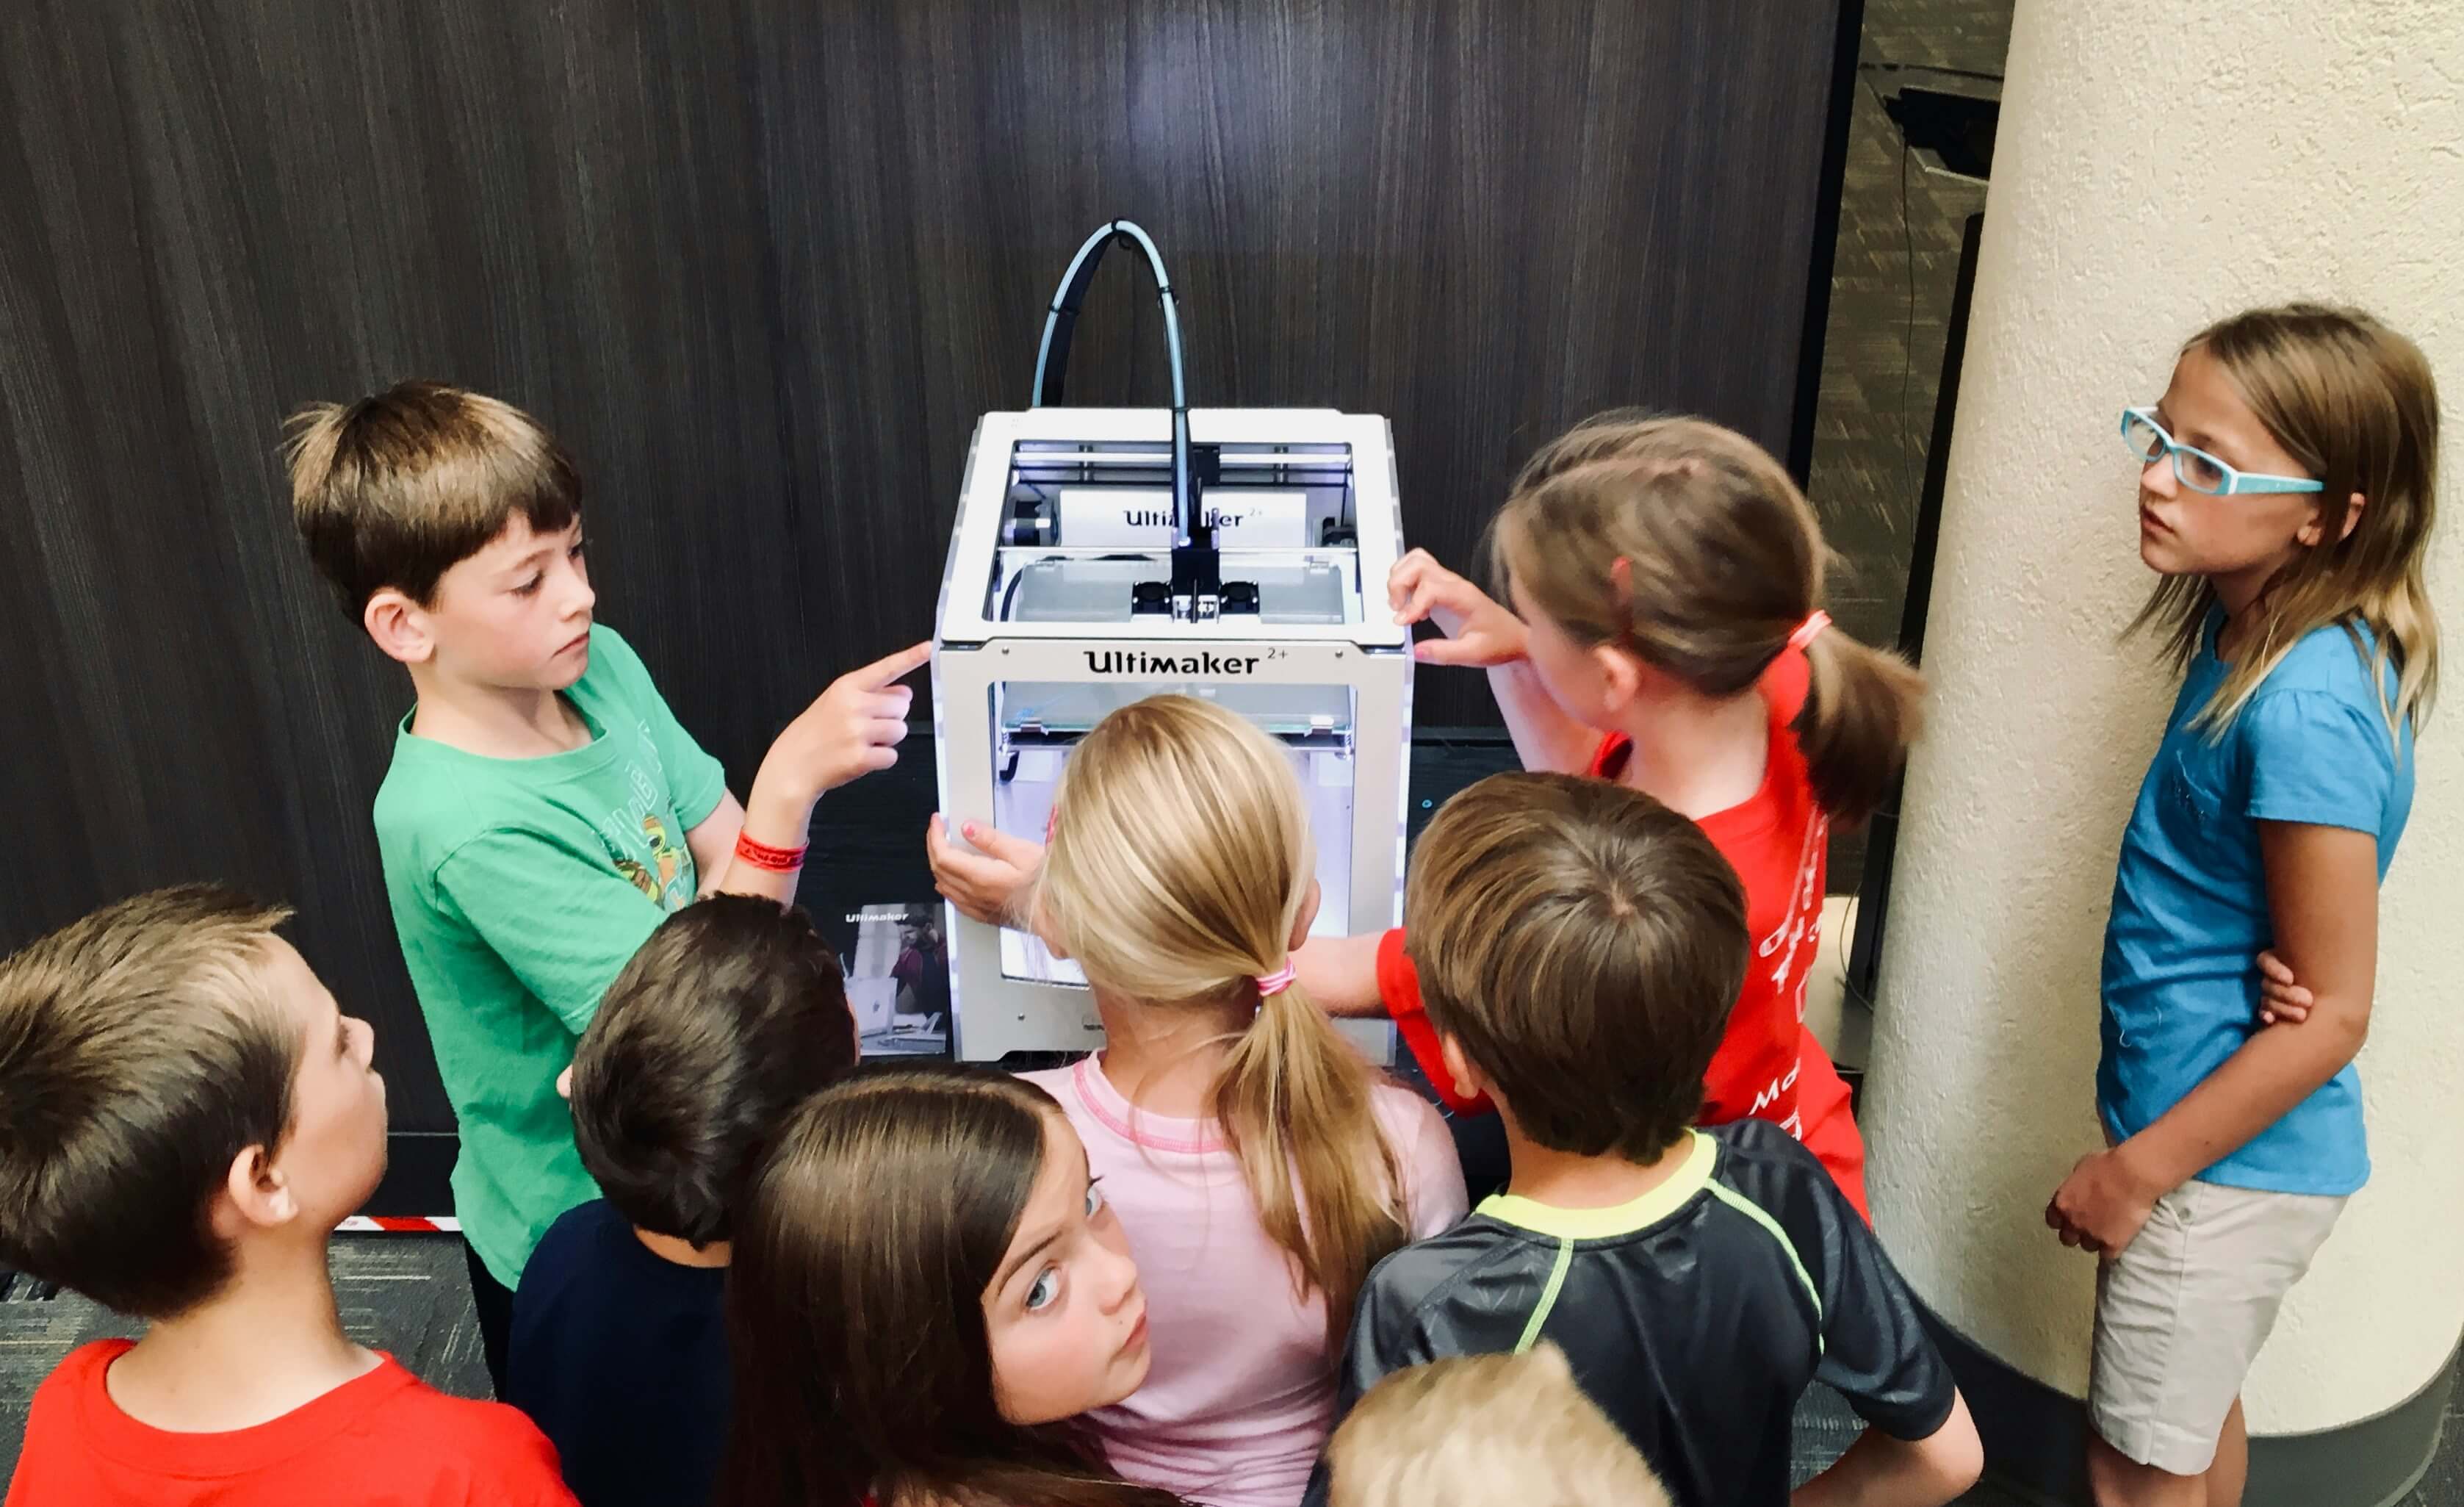 The popularity of 3D printing is making kids more aware of the technology